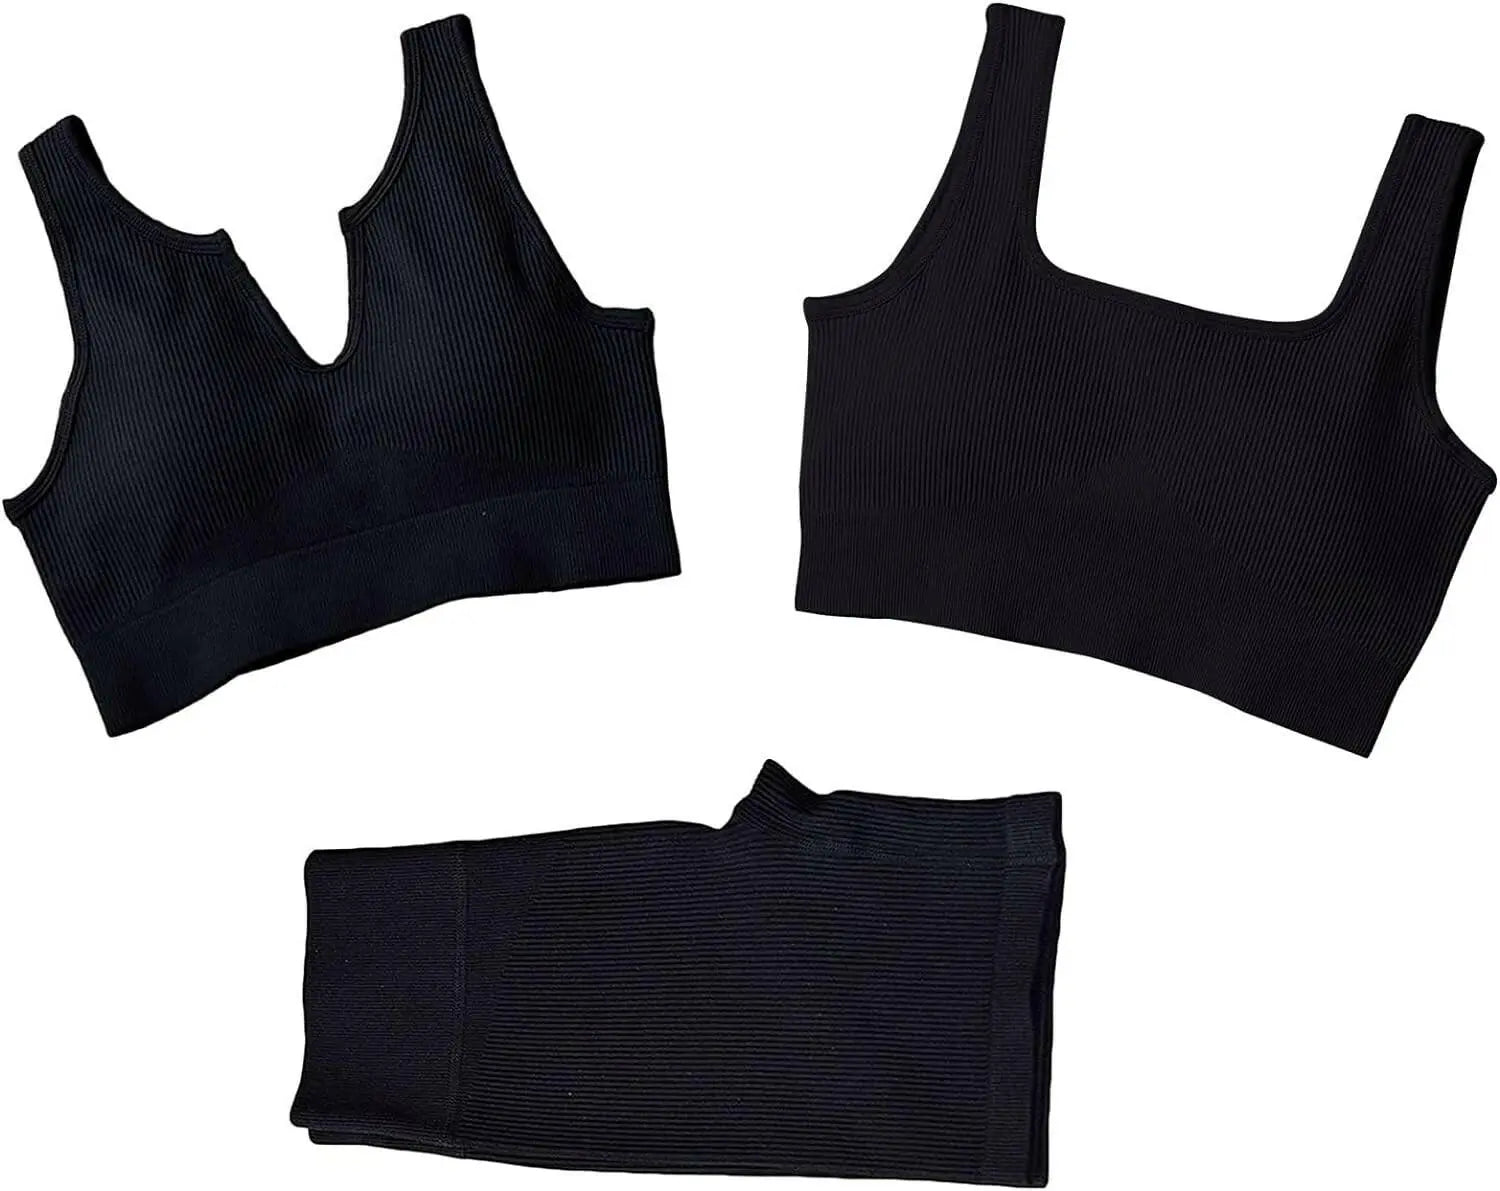 Peer 3PCS Workout Set for Women - Ribbed Sports Bra, High Waist Shorts, and Crop Top Co-ord Set for Gym, Yoga, Running and Fitness